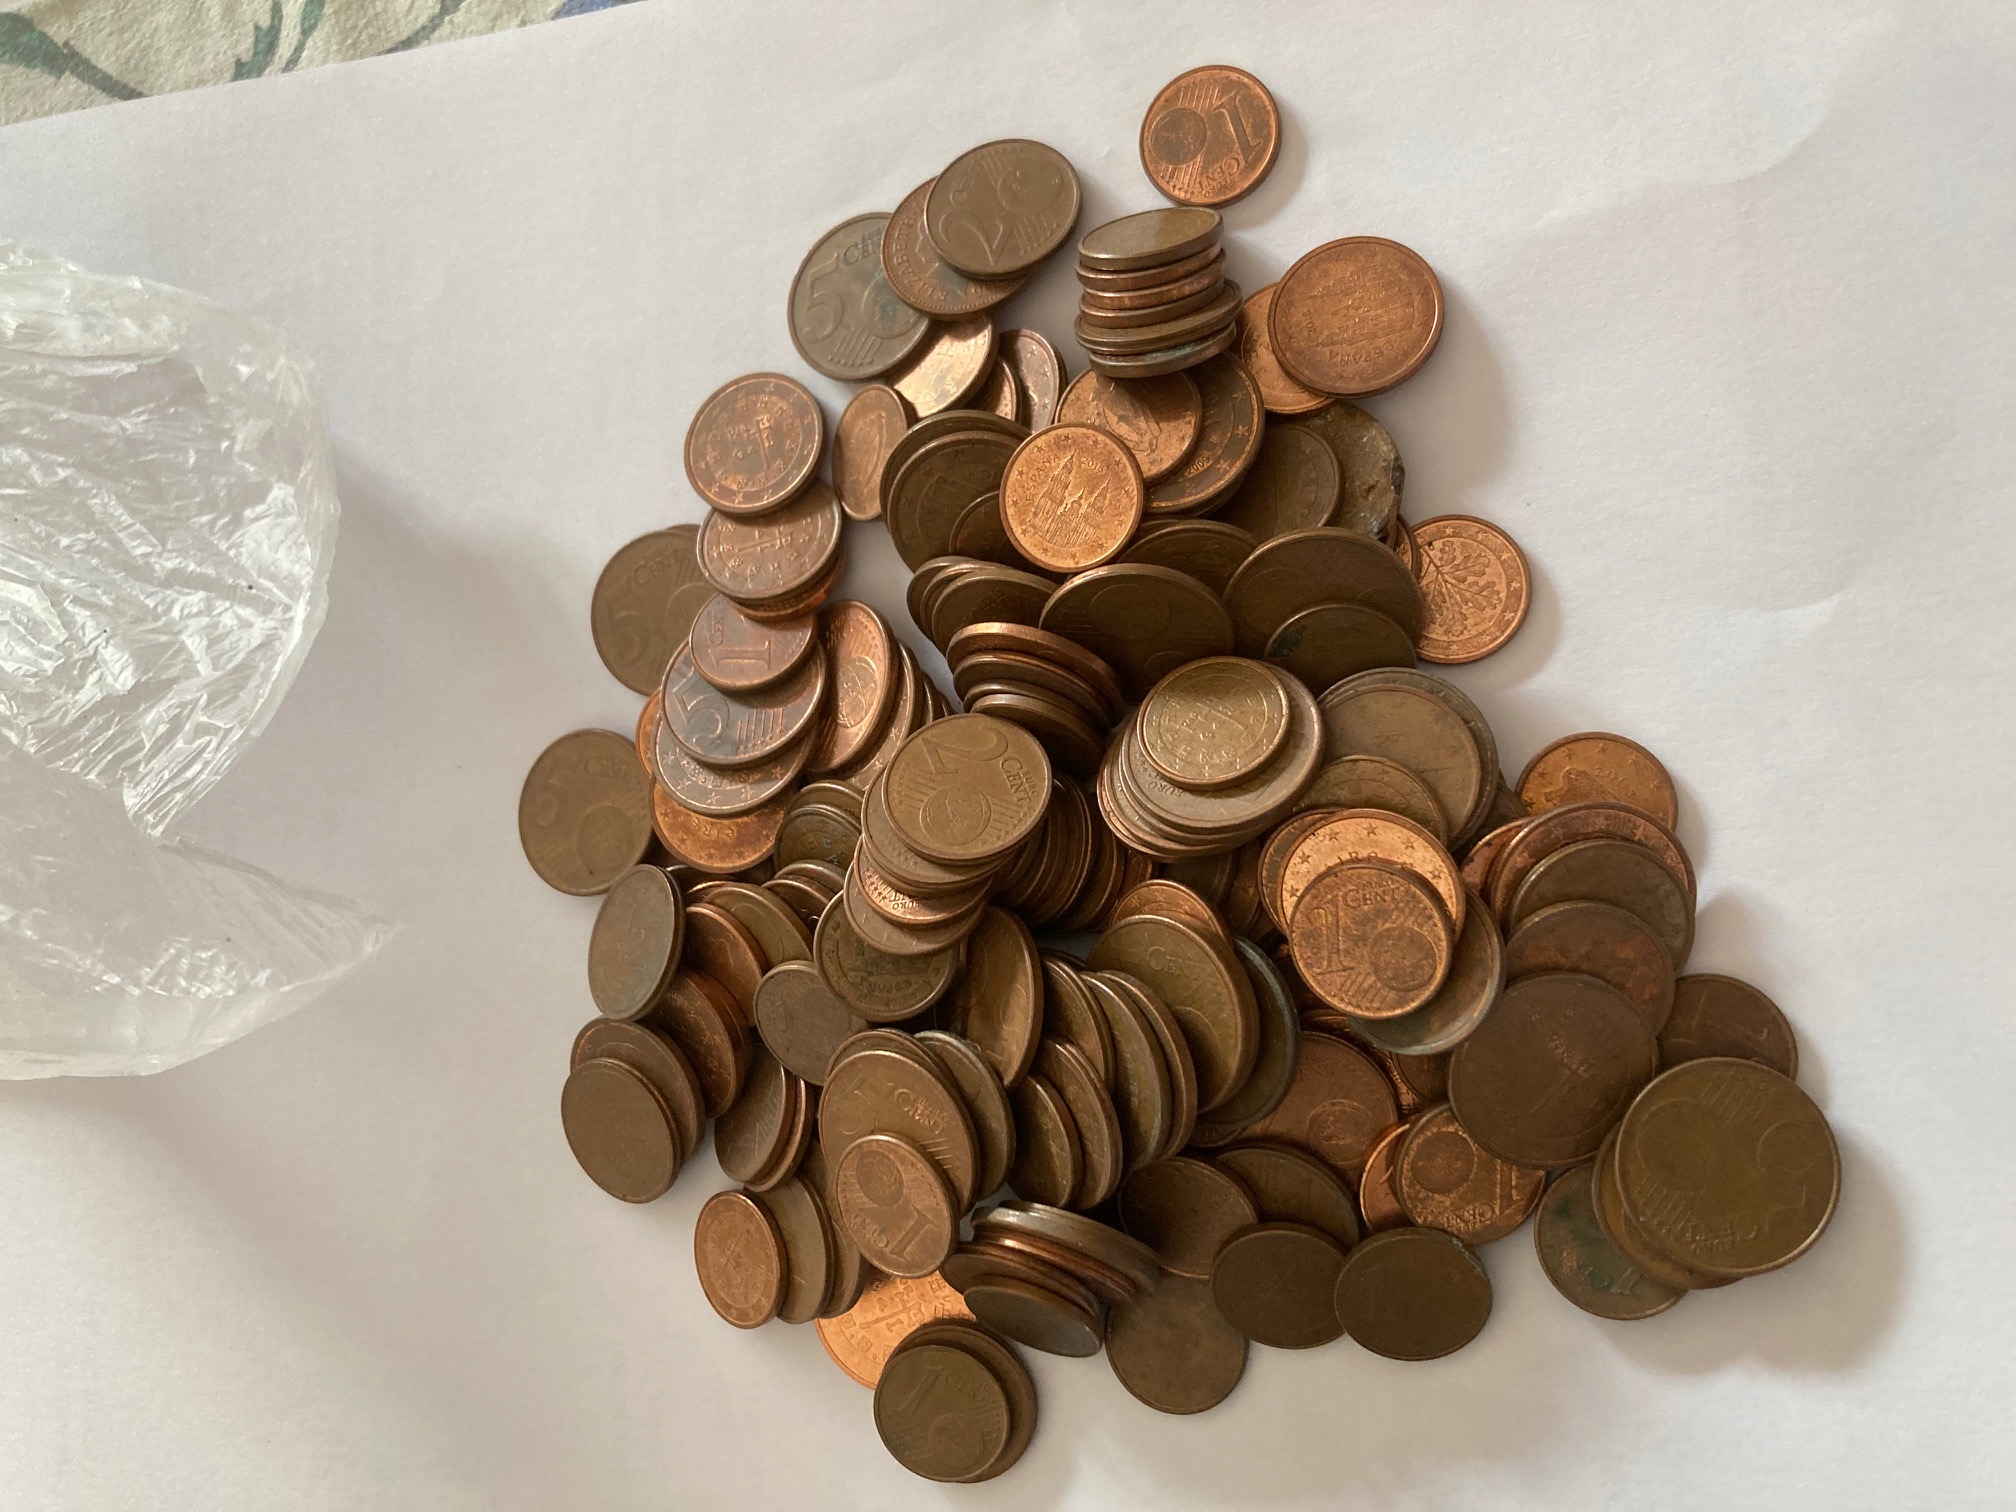 A pile of copper coins.